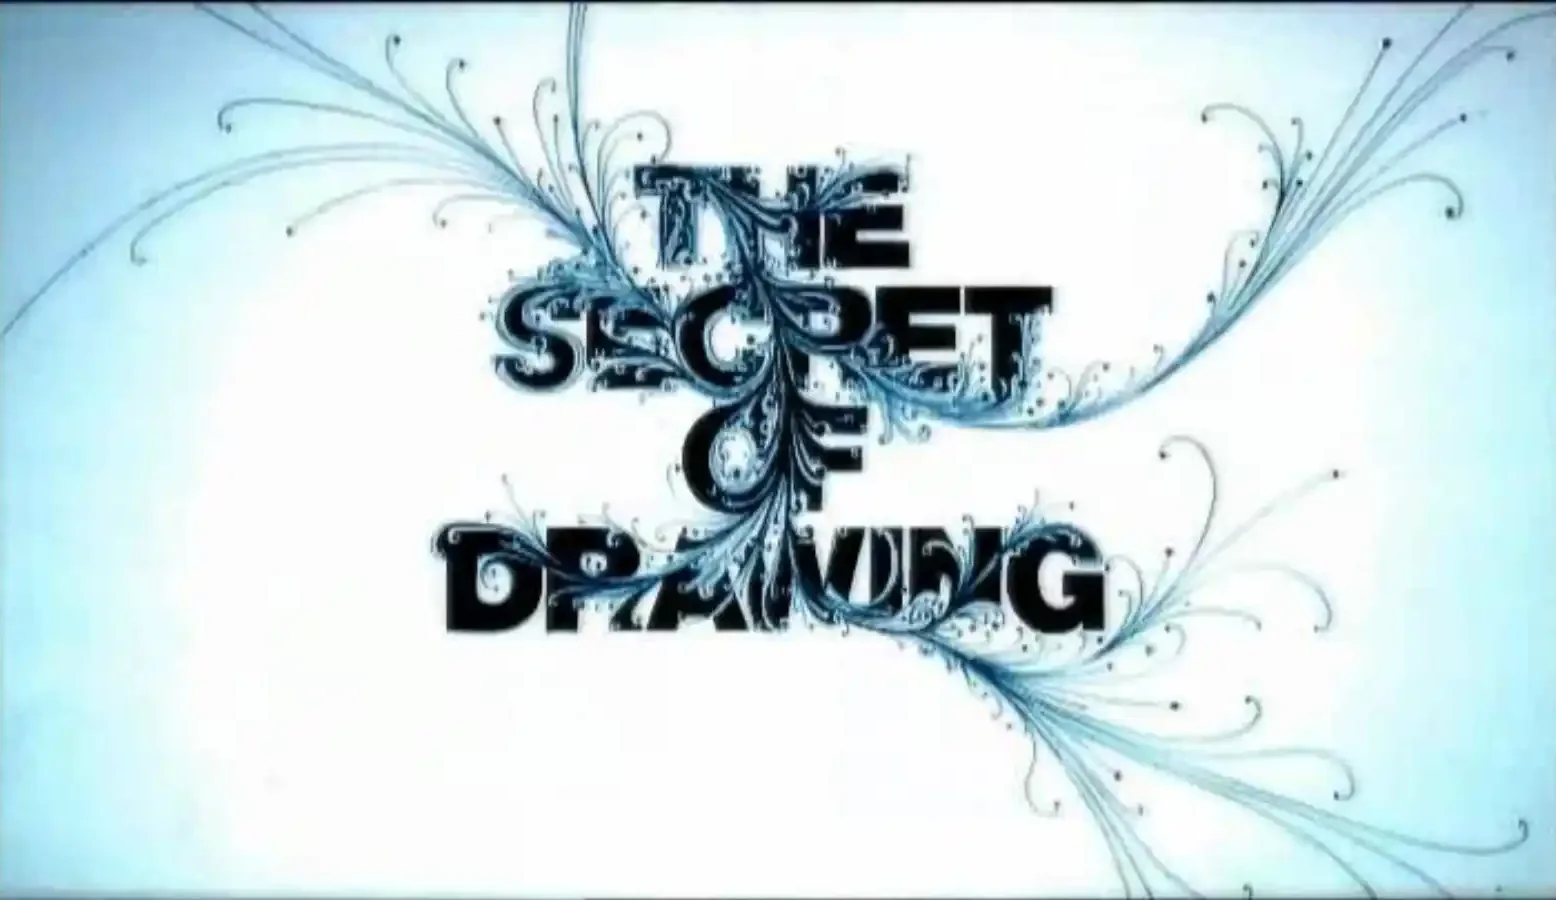 The Secret of Drawing episode 2